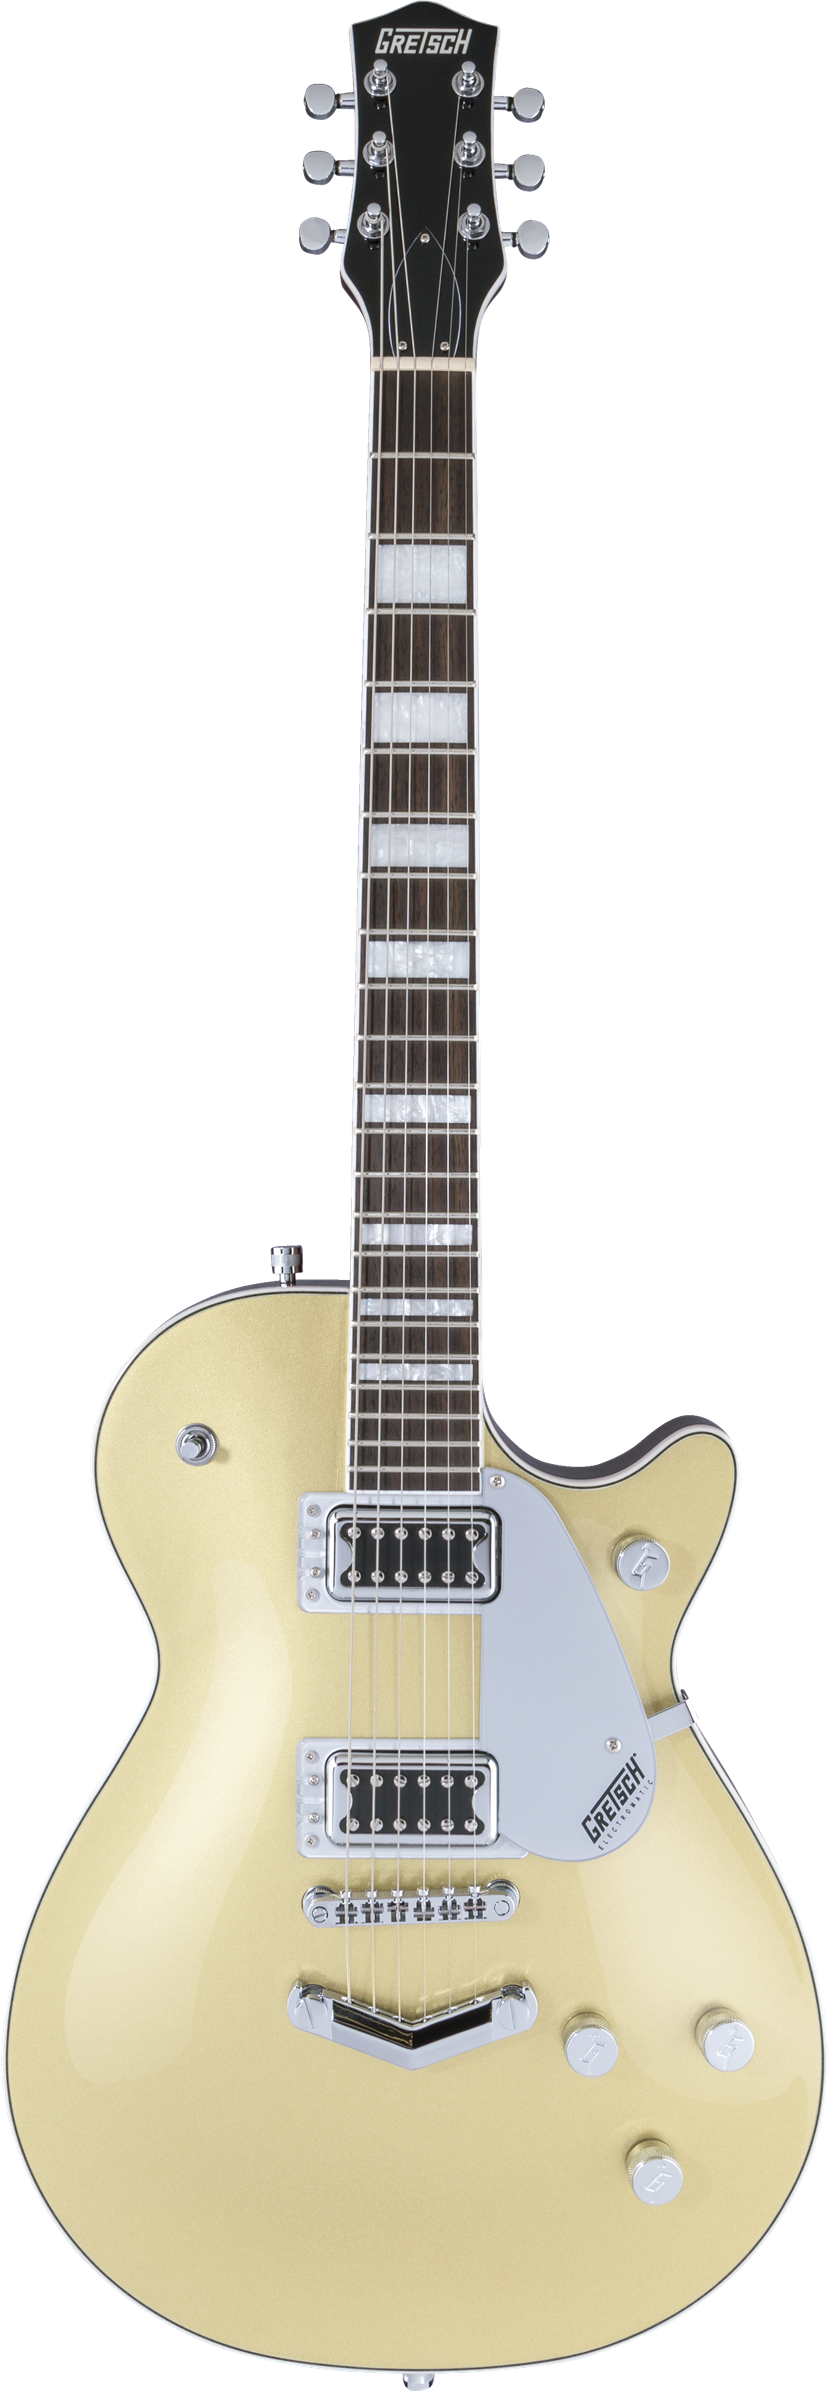 Gretsch G5220 Electromatic Jet Solidbody Electric Guitar - Casino Gold